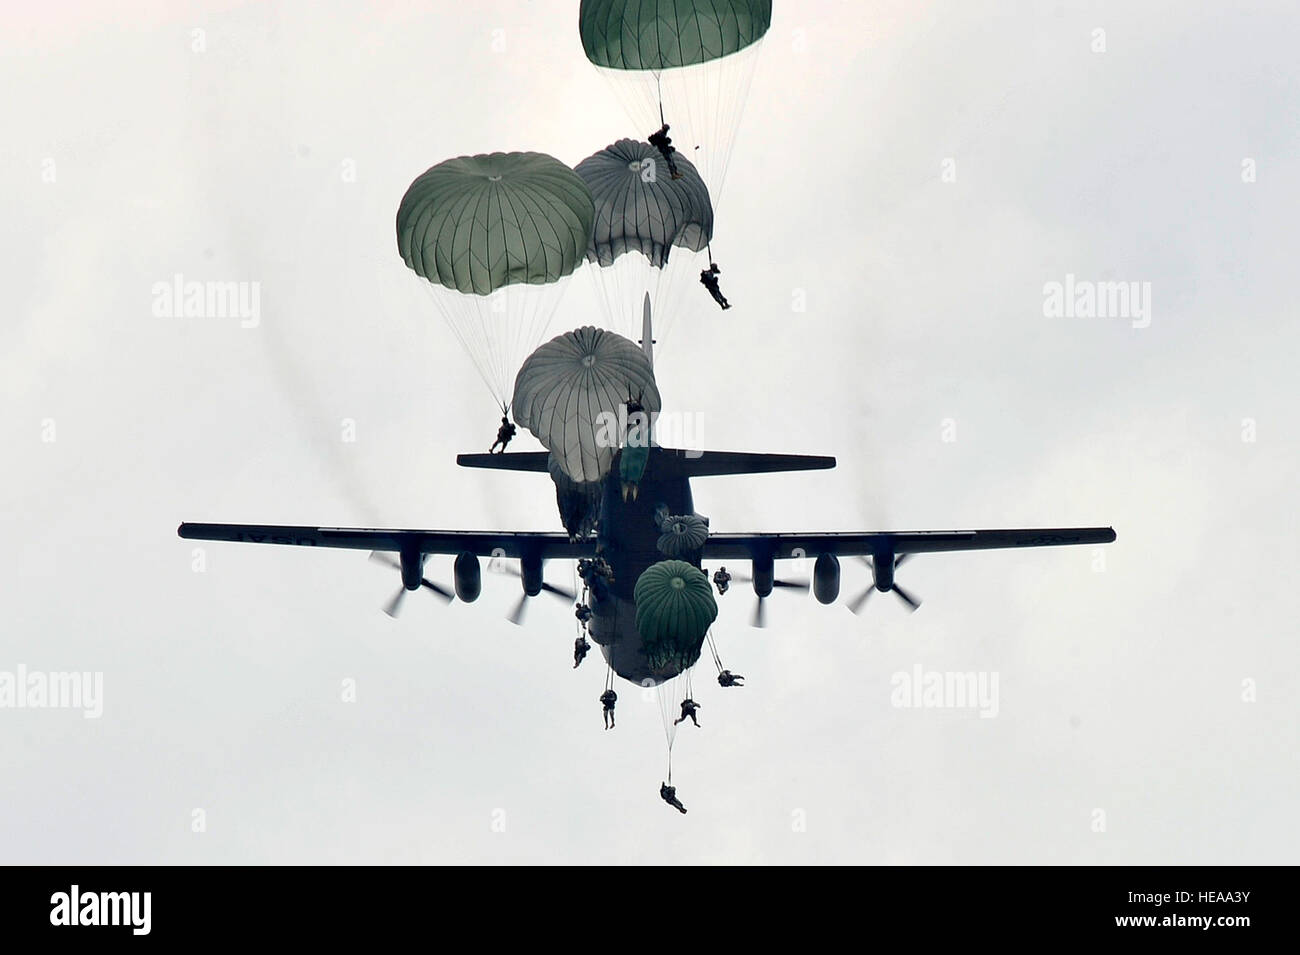 U.S. Air Force C-130 Hercules drops U.S. Army paratroopers of the 82nd Airborne Division onto Luzon drop zone during a training mission prior to Joint Operations Access Exercise 12-02 at Mackall Army Airfield, N.C., June 4, 2012. JOAX is a two-week forcible entry and ground combat exercise to prepare Air Force and Army service members to respond to worldwide crises and contingencies. Stock Photo